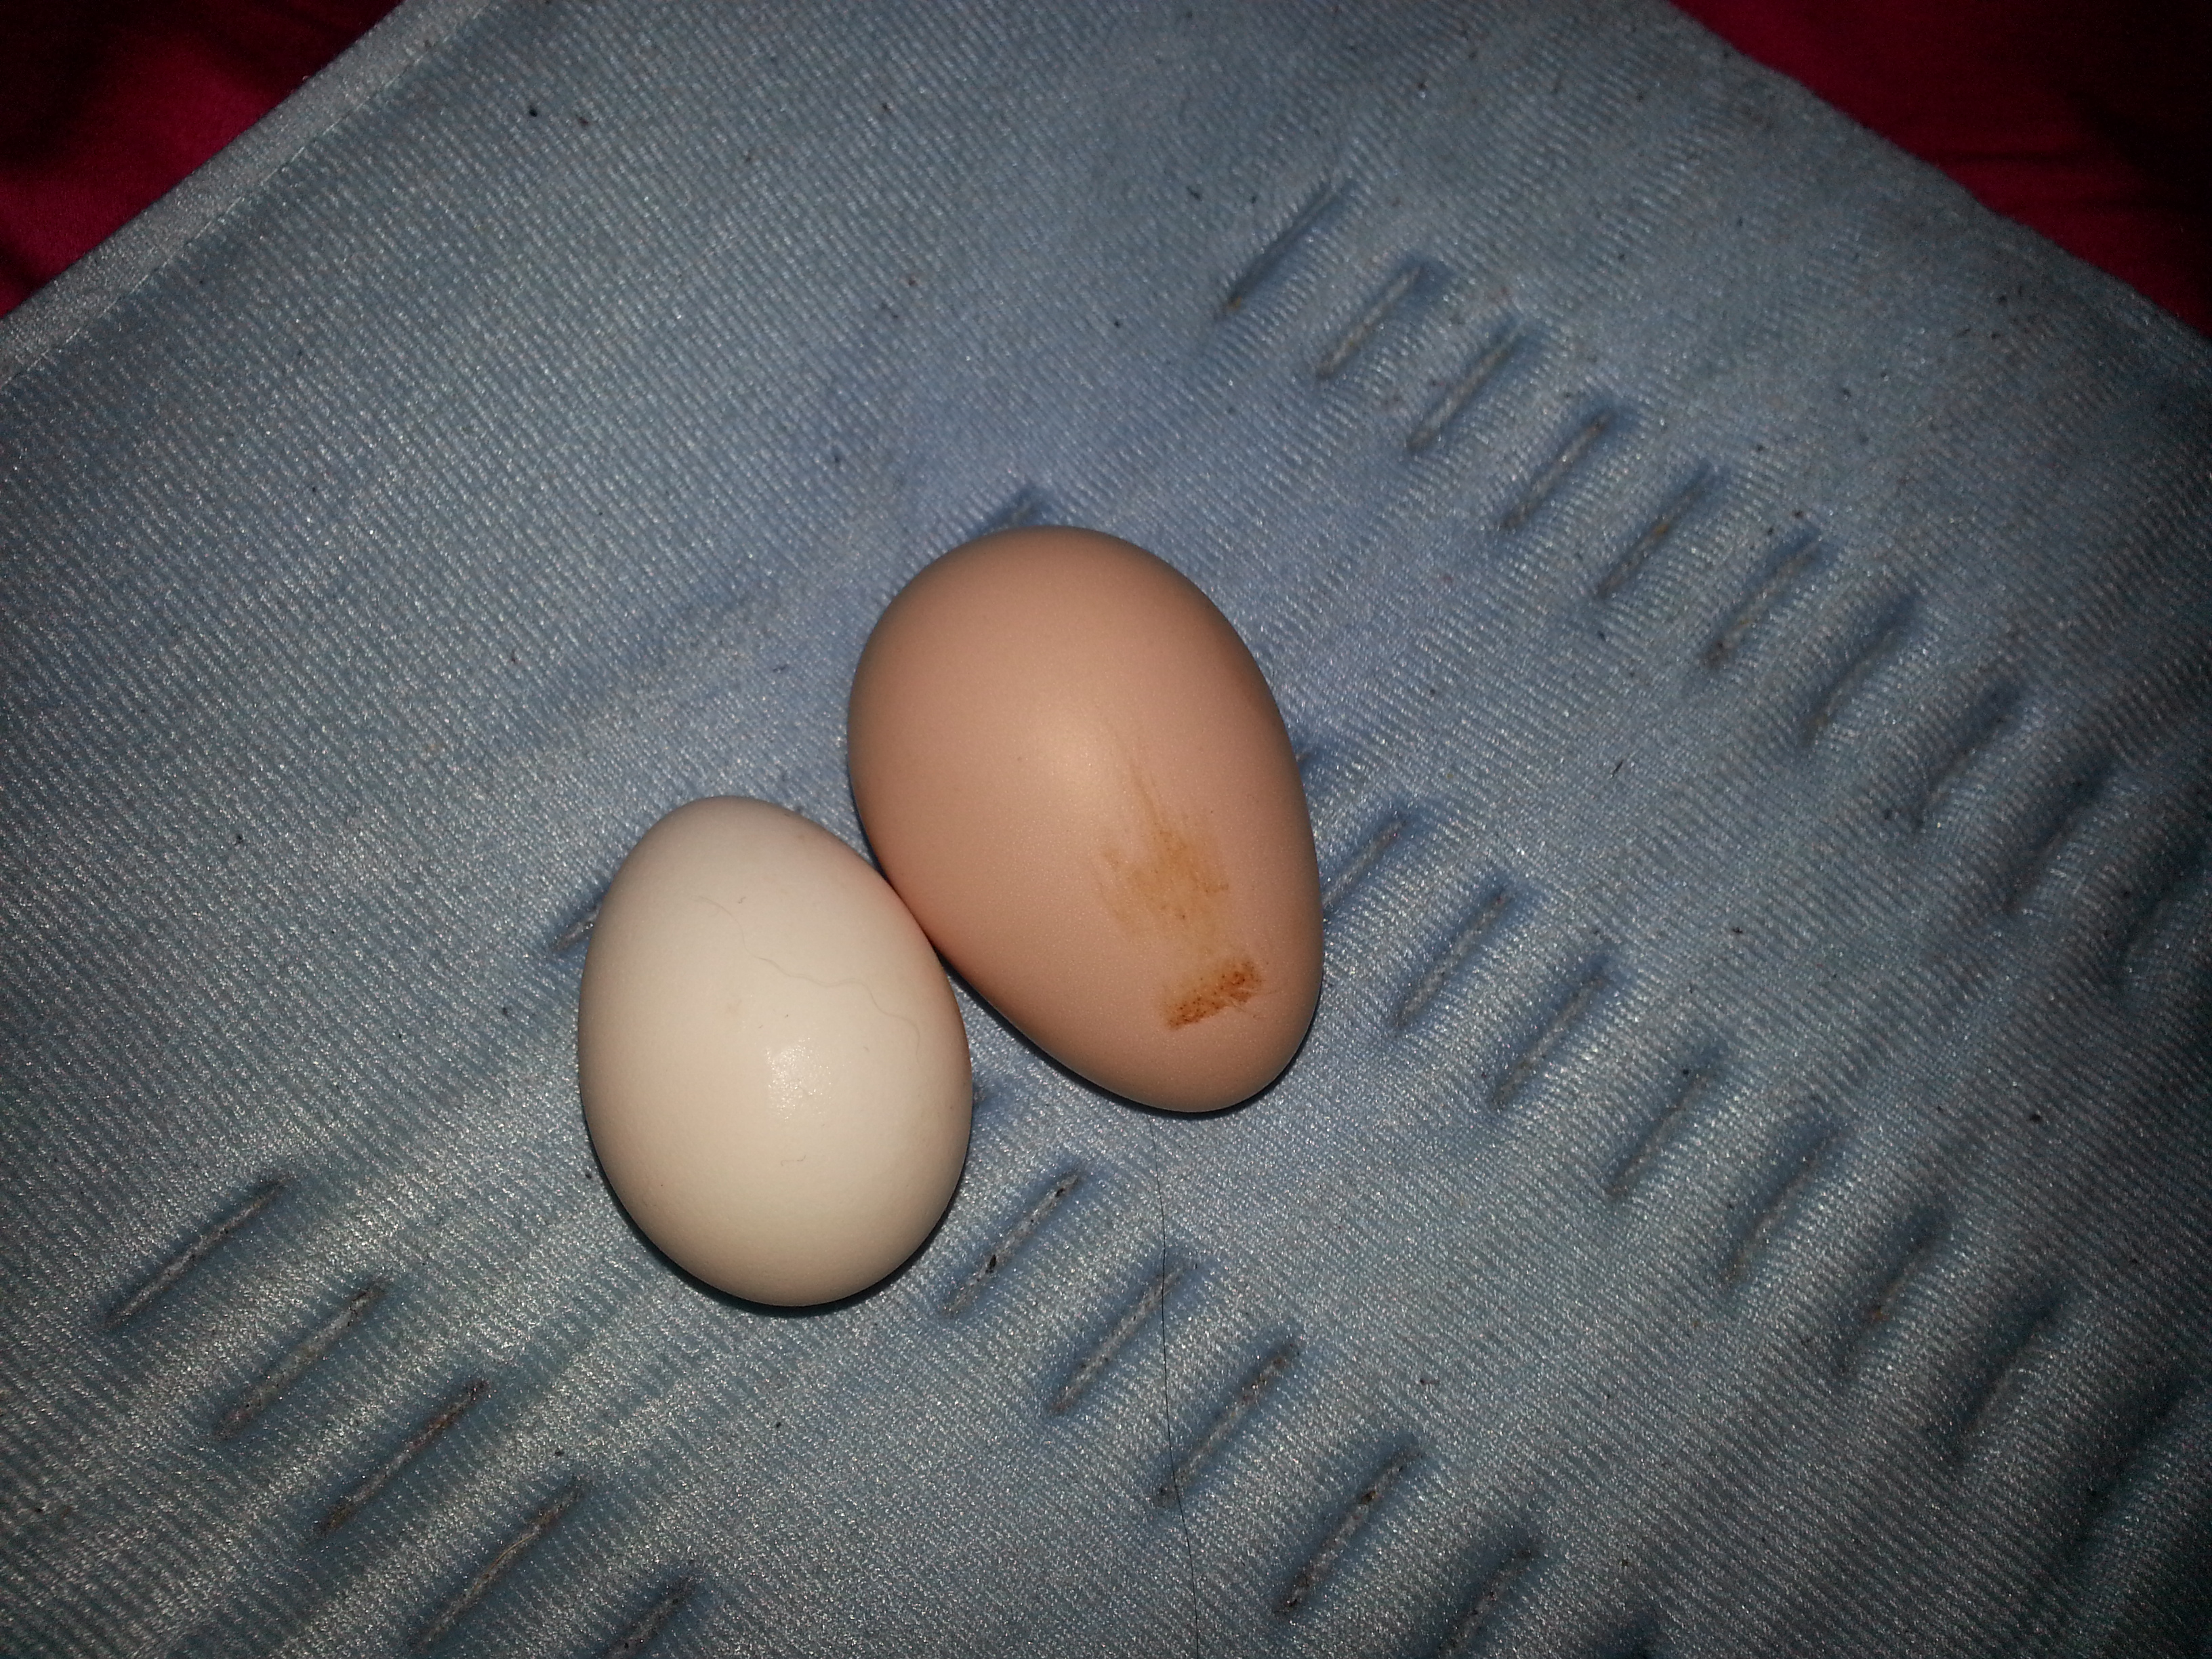 Girls first eggs..the one on the r looks extra ouchy poor chicky-doo bled a bit.8 (